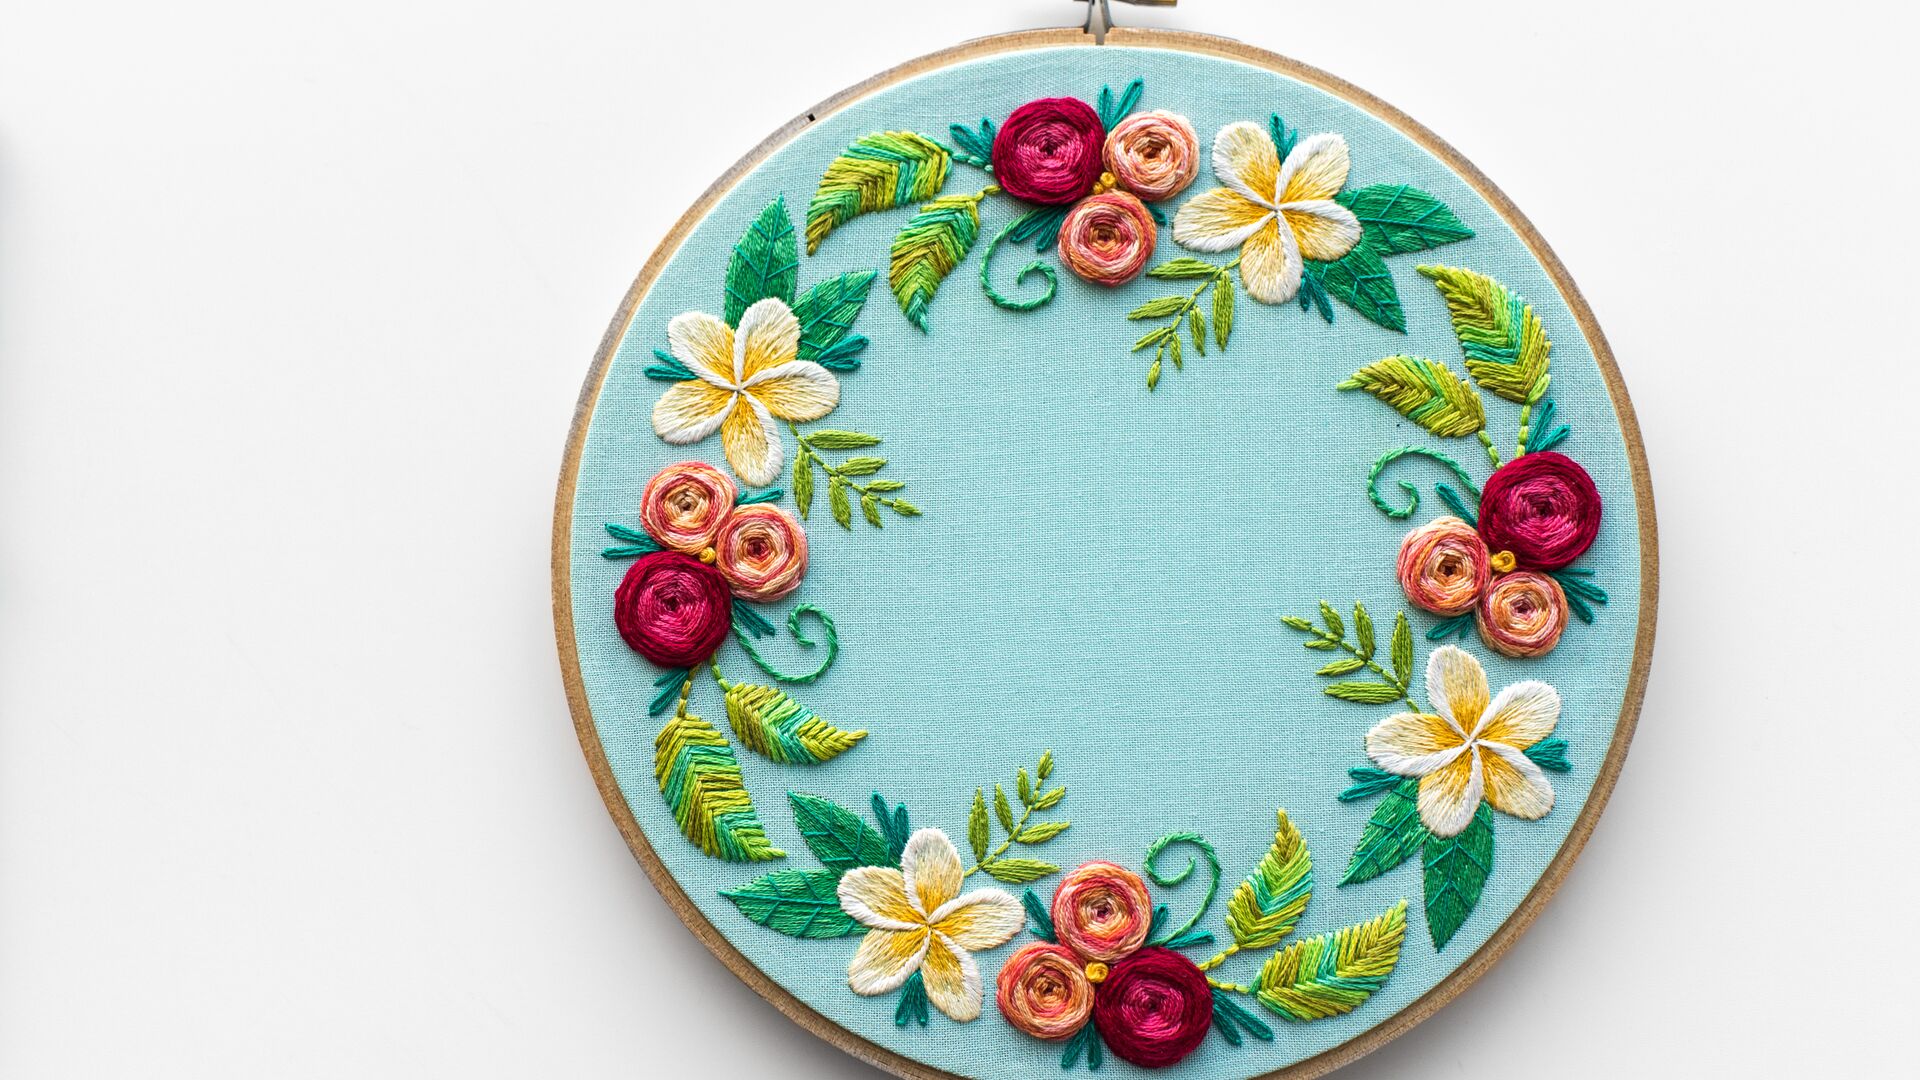 Get in on Hand Embroidery With Beginner Projects